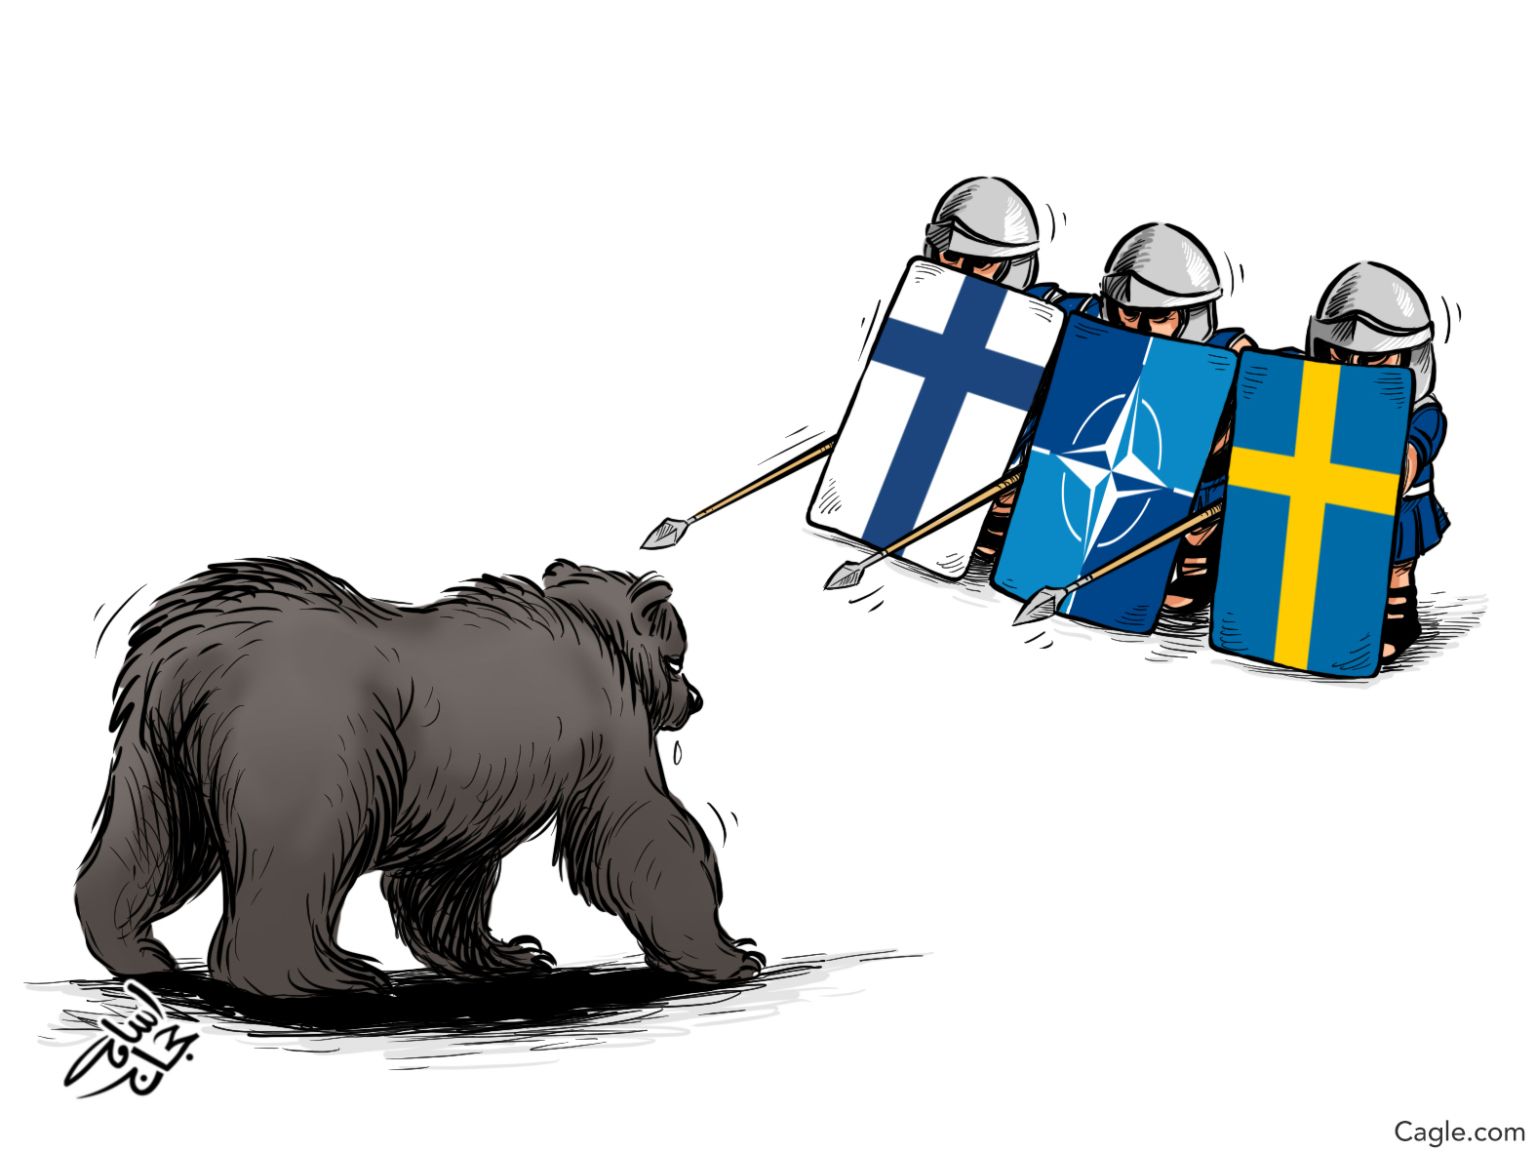 Finland and Sweden may join Nato - News JustIN Political Cartoon - newsjustin.press